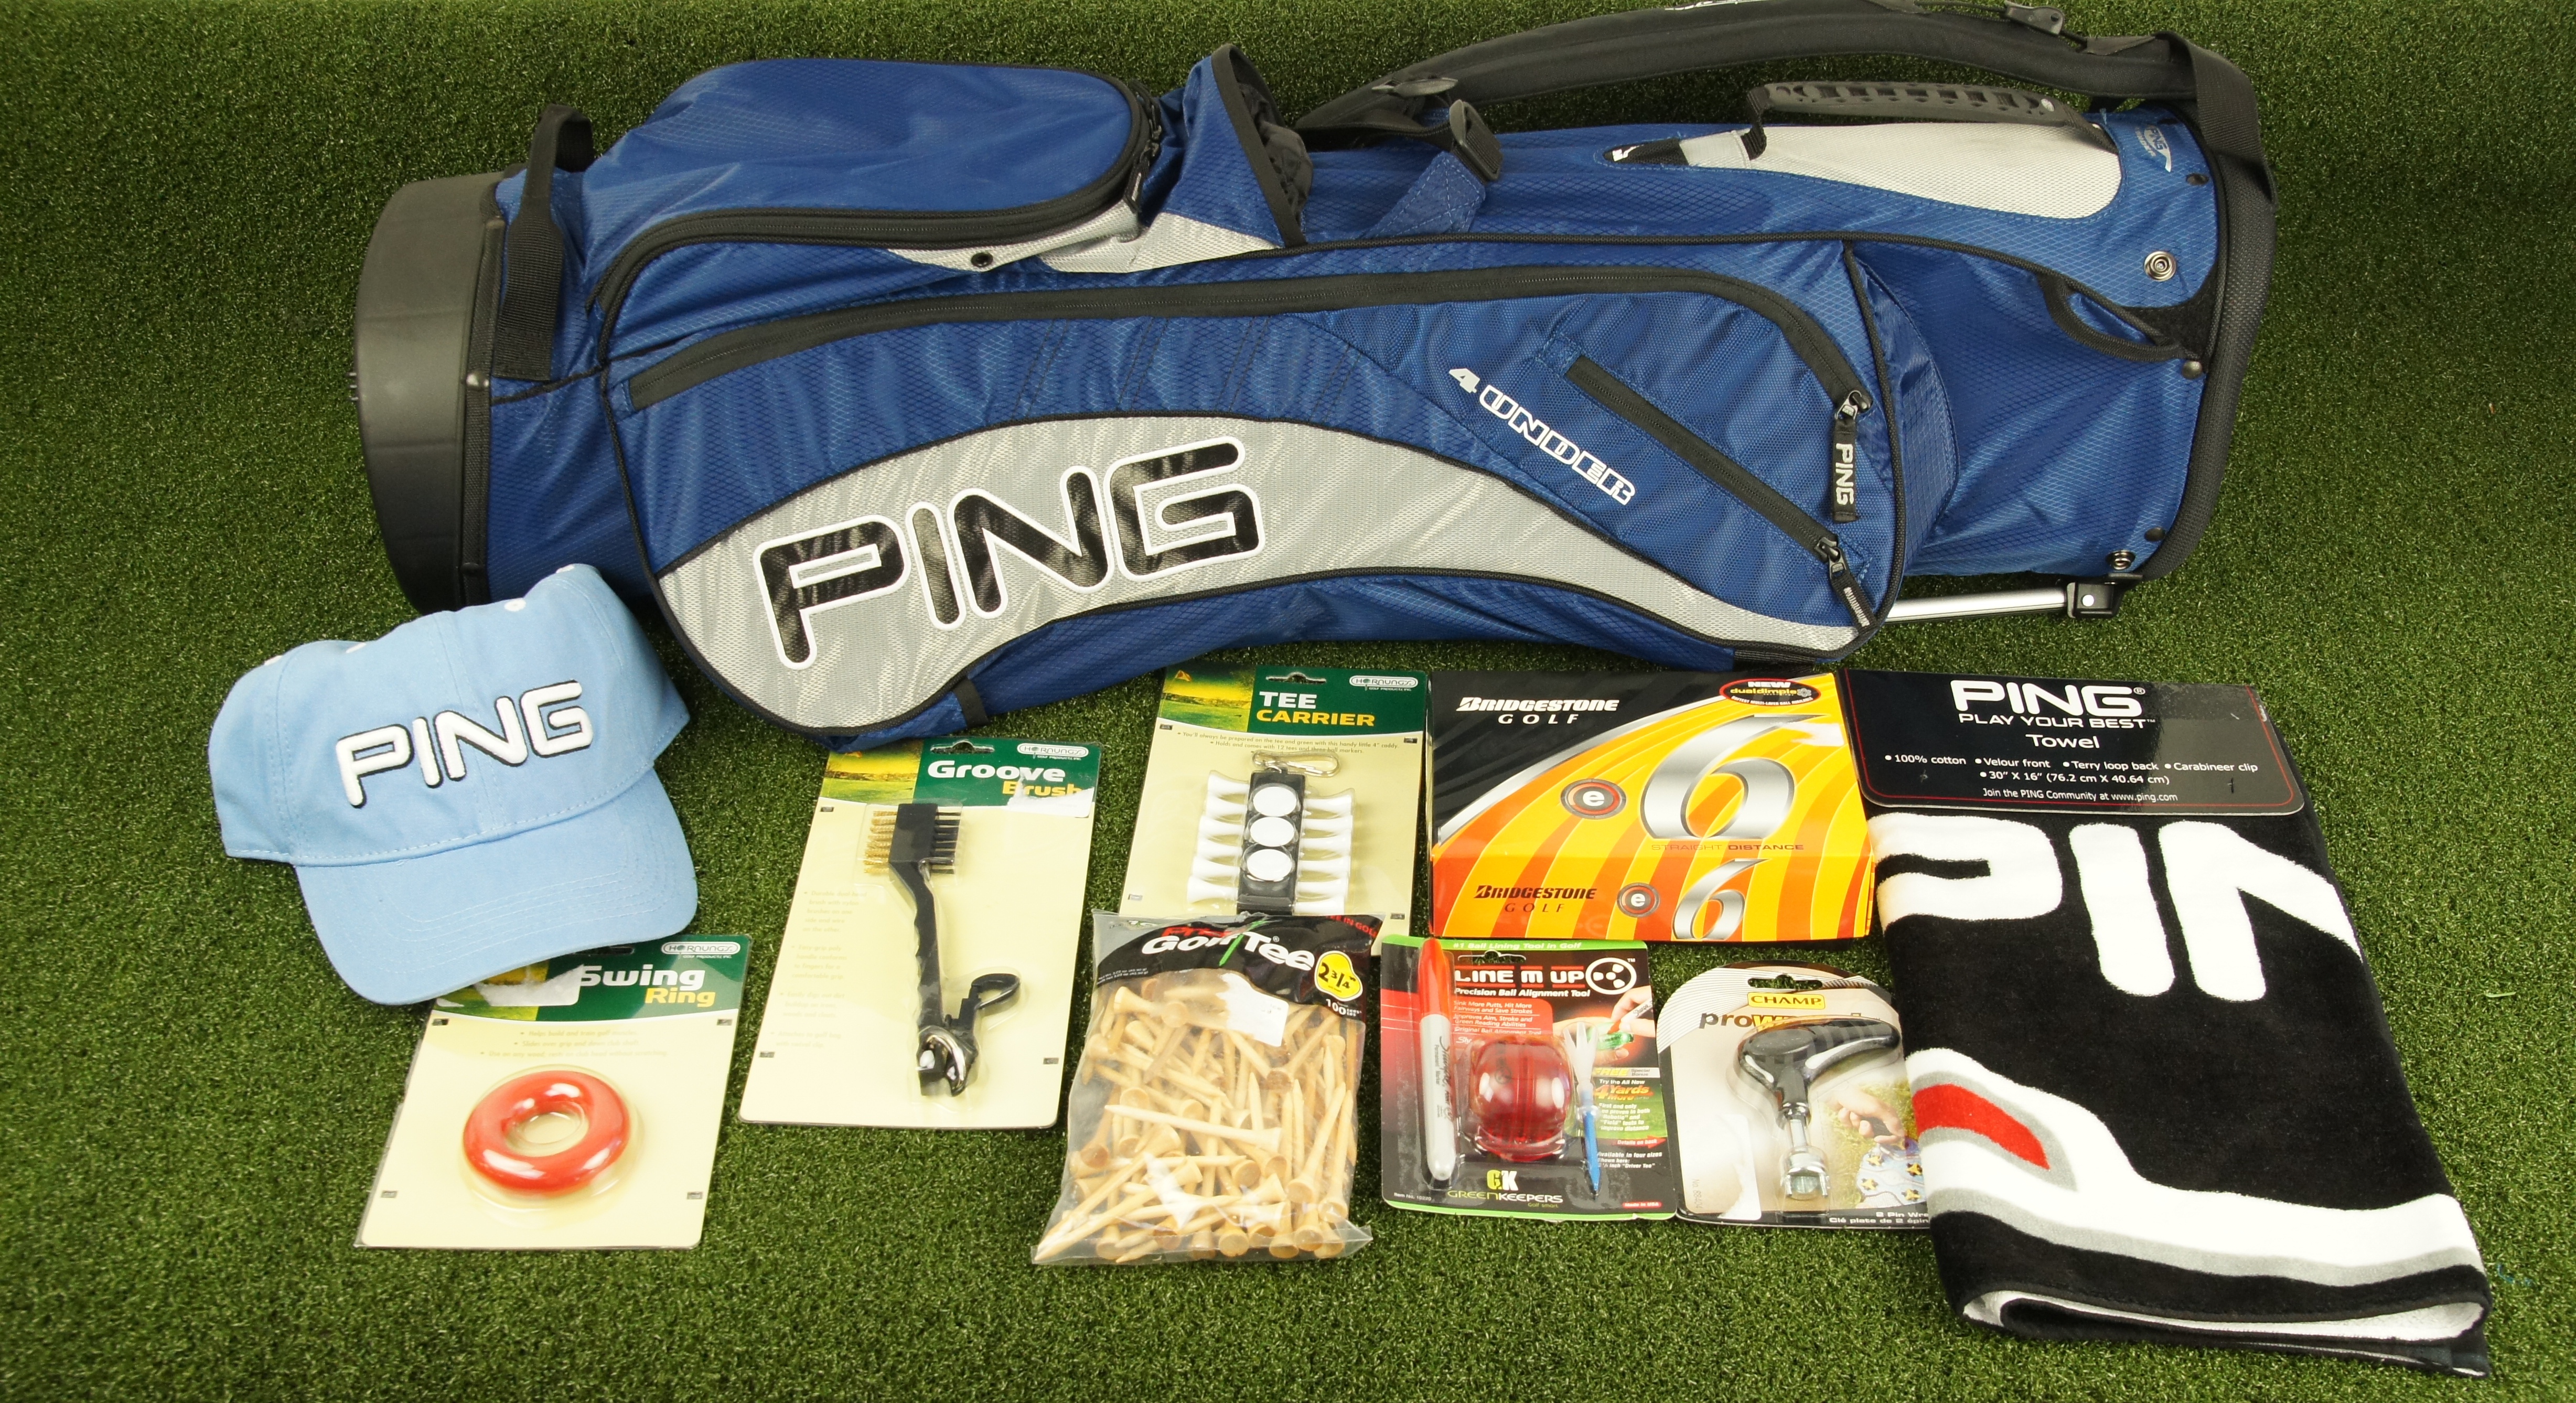 Enter Our PING Grab Bag Giveaway